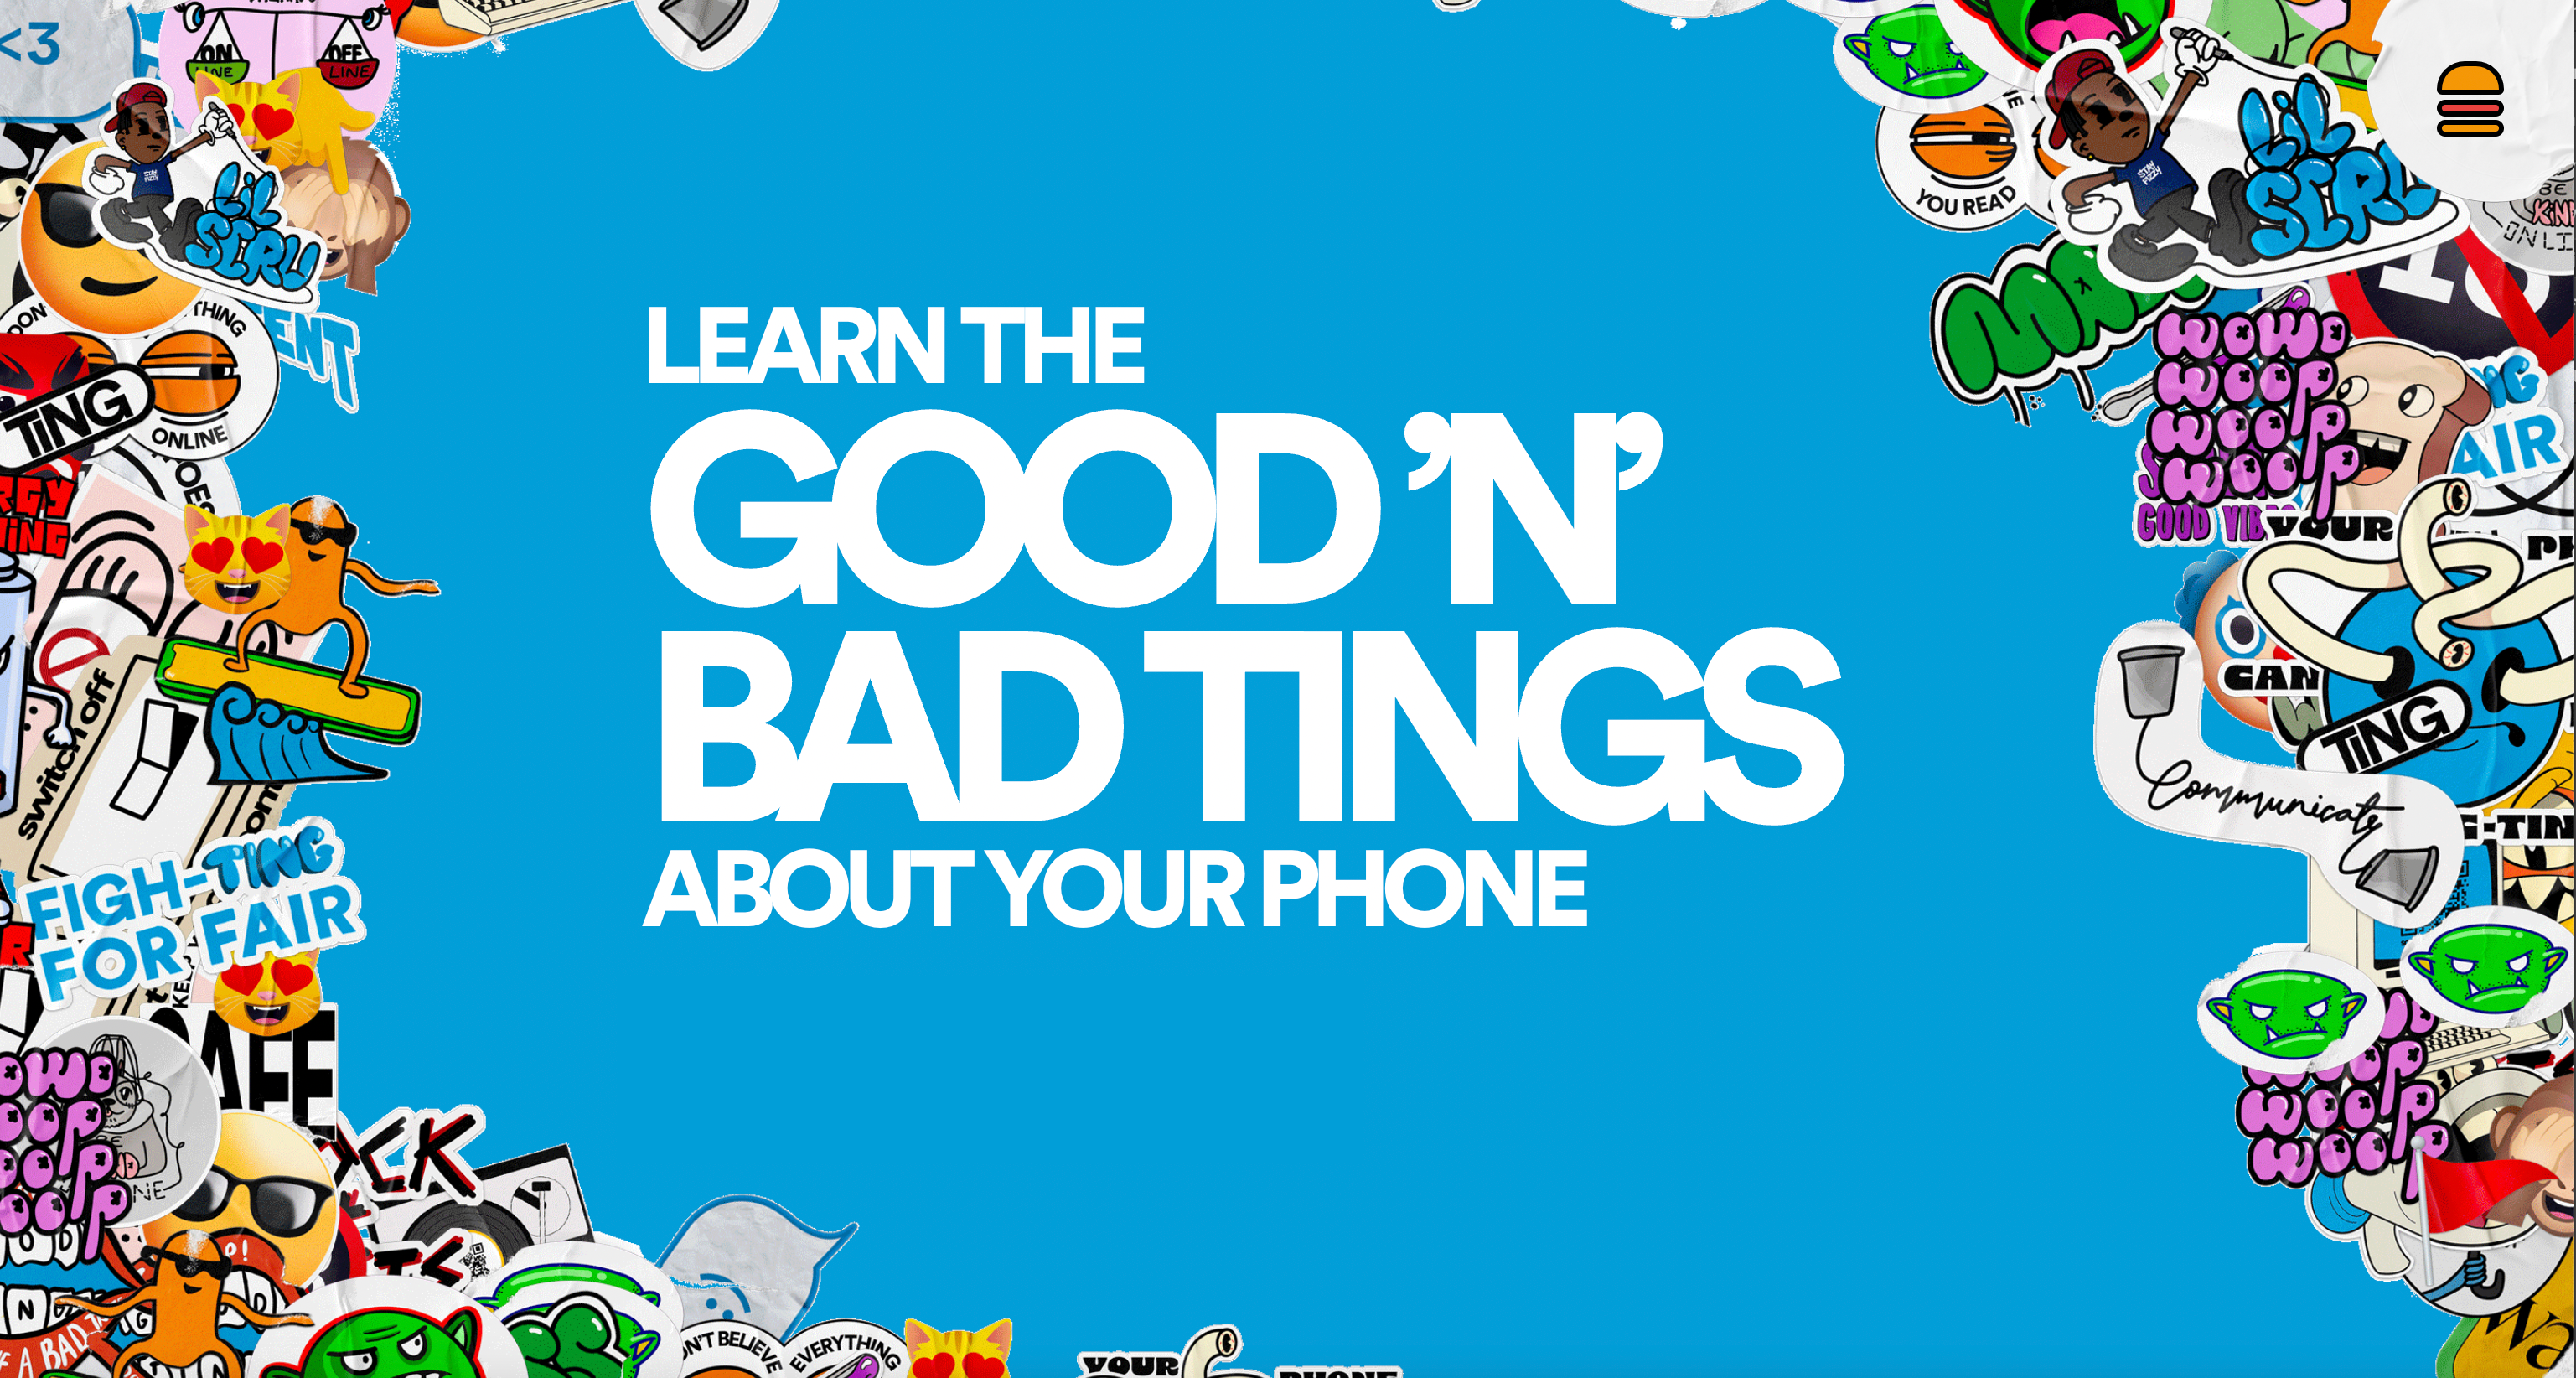 Learn the good and bad things about your phone.